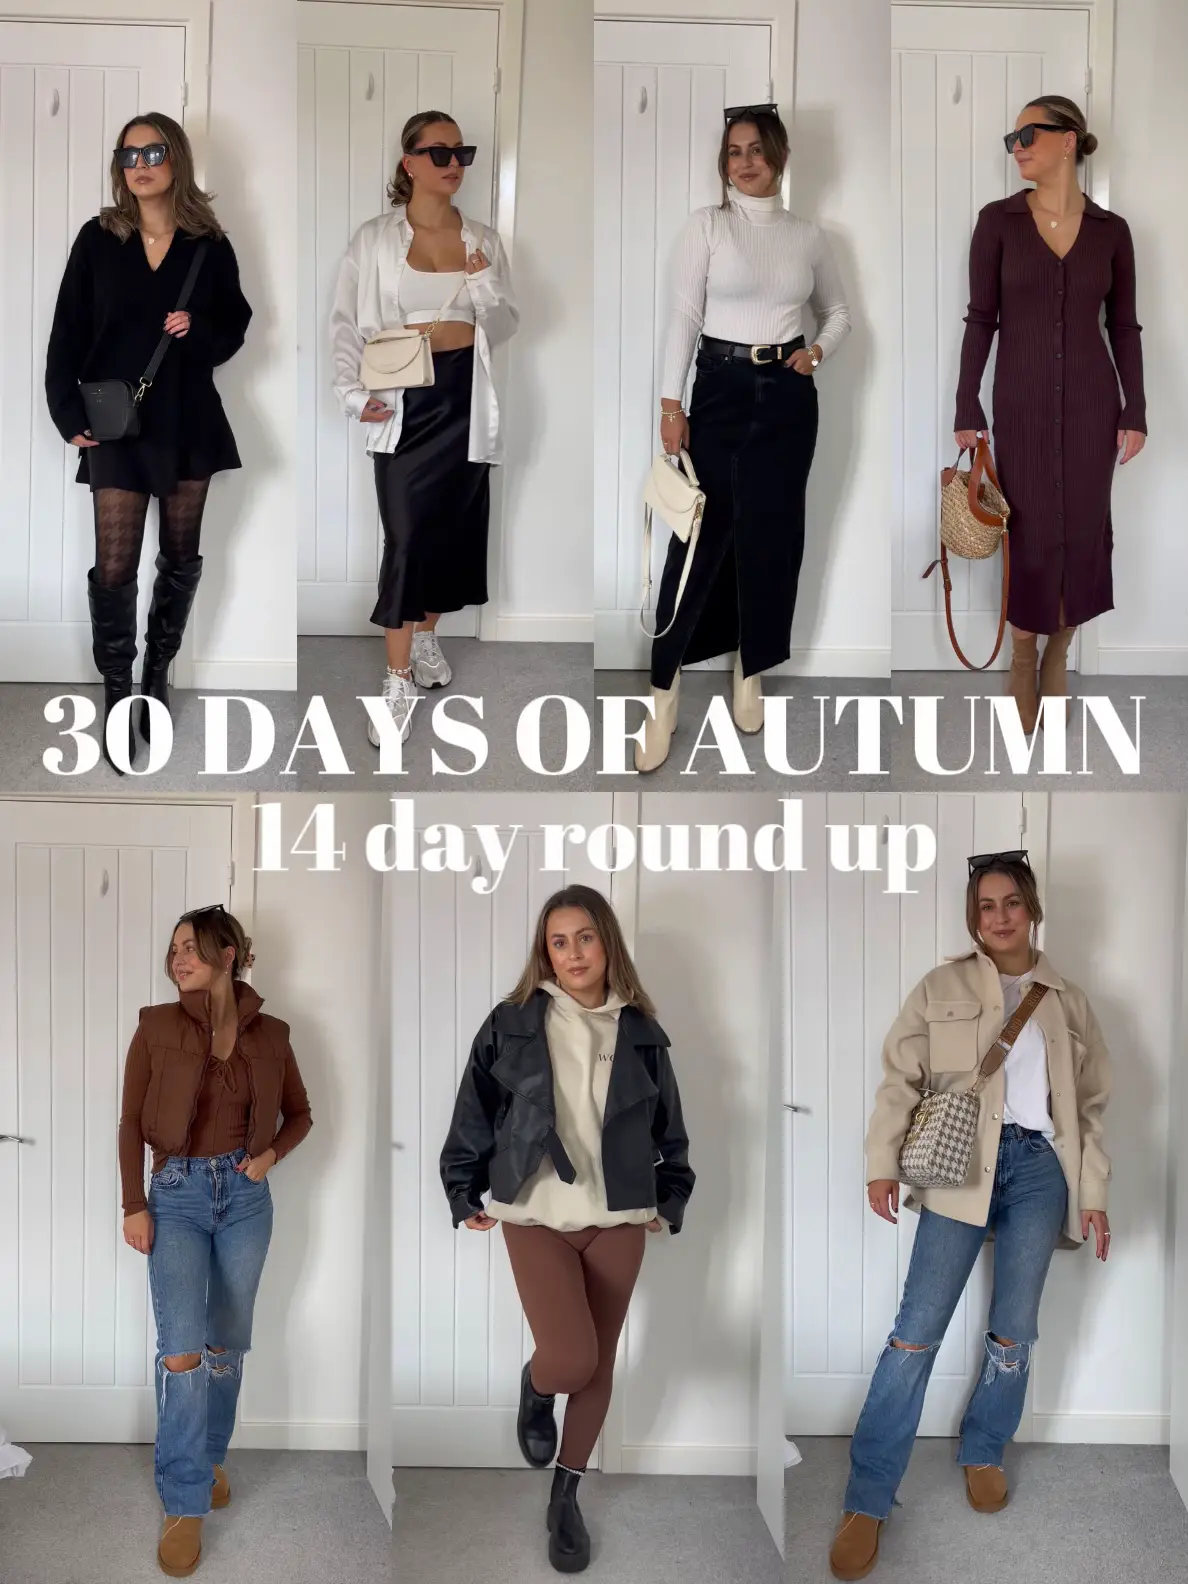 midsize fall outfits🍂  Cute fall outfits, Midsize outfits, Curvy girl  outfits